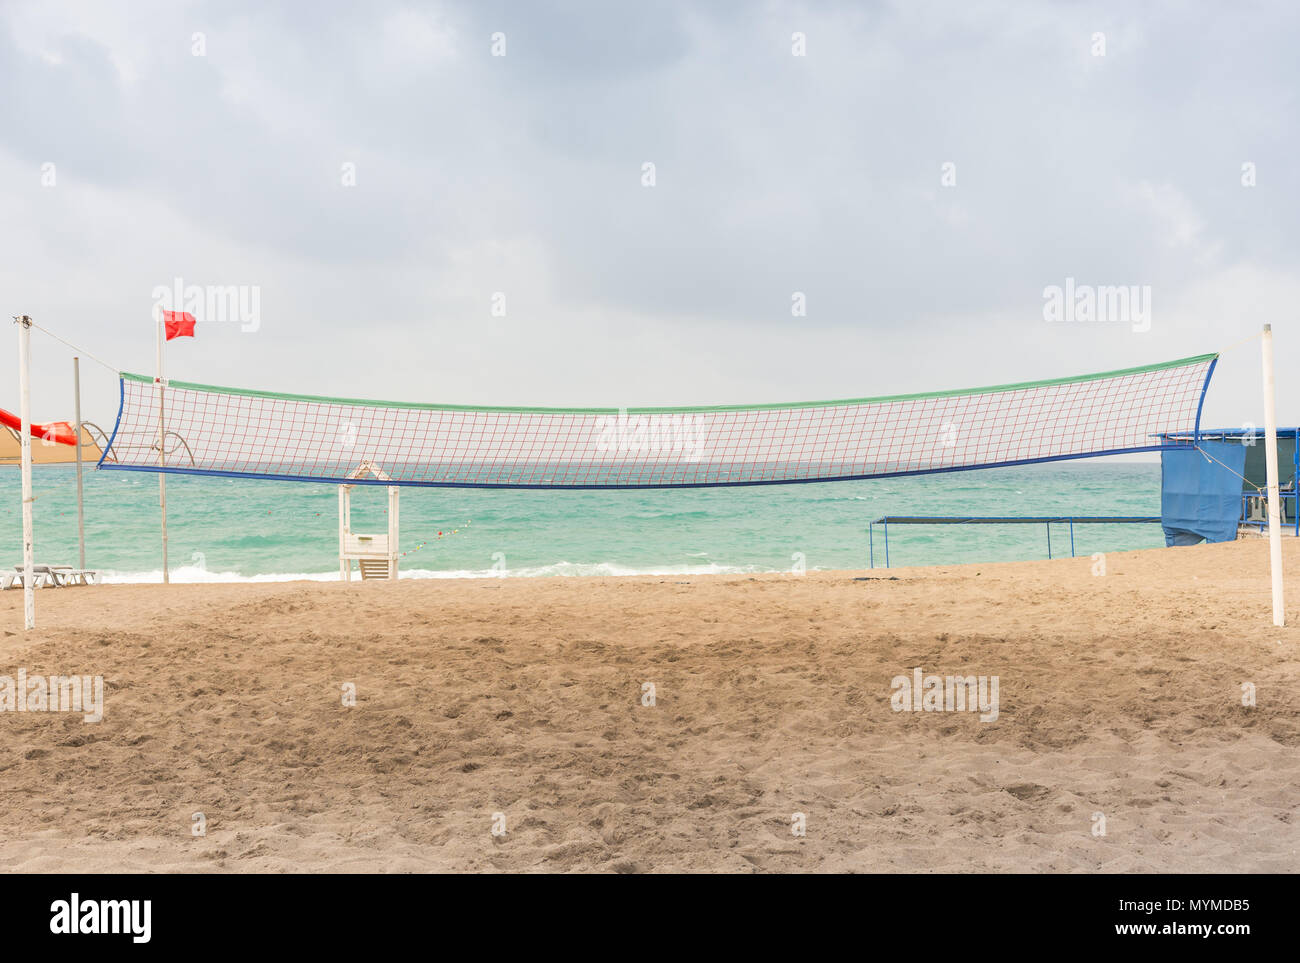 Beach Volleyball Net On Sandy Beach With Sea And Blue Sky In The